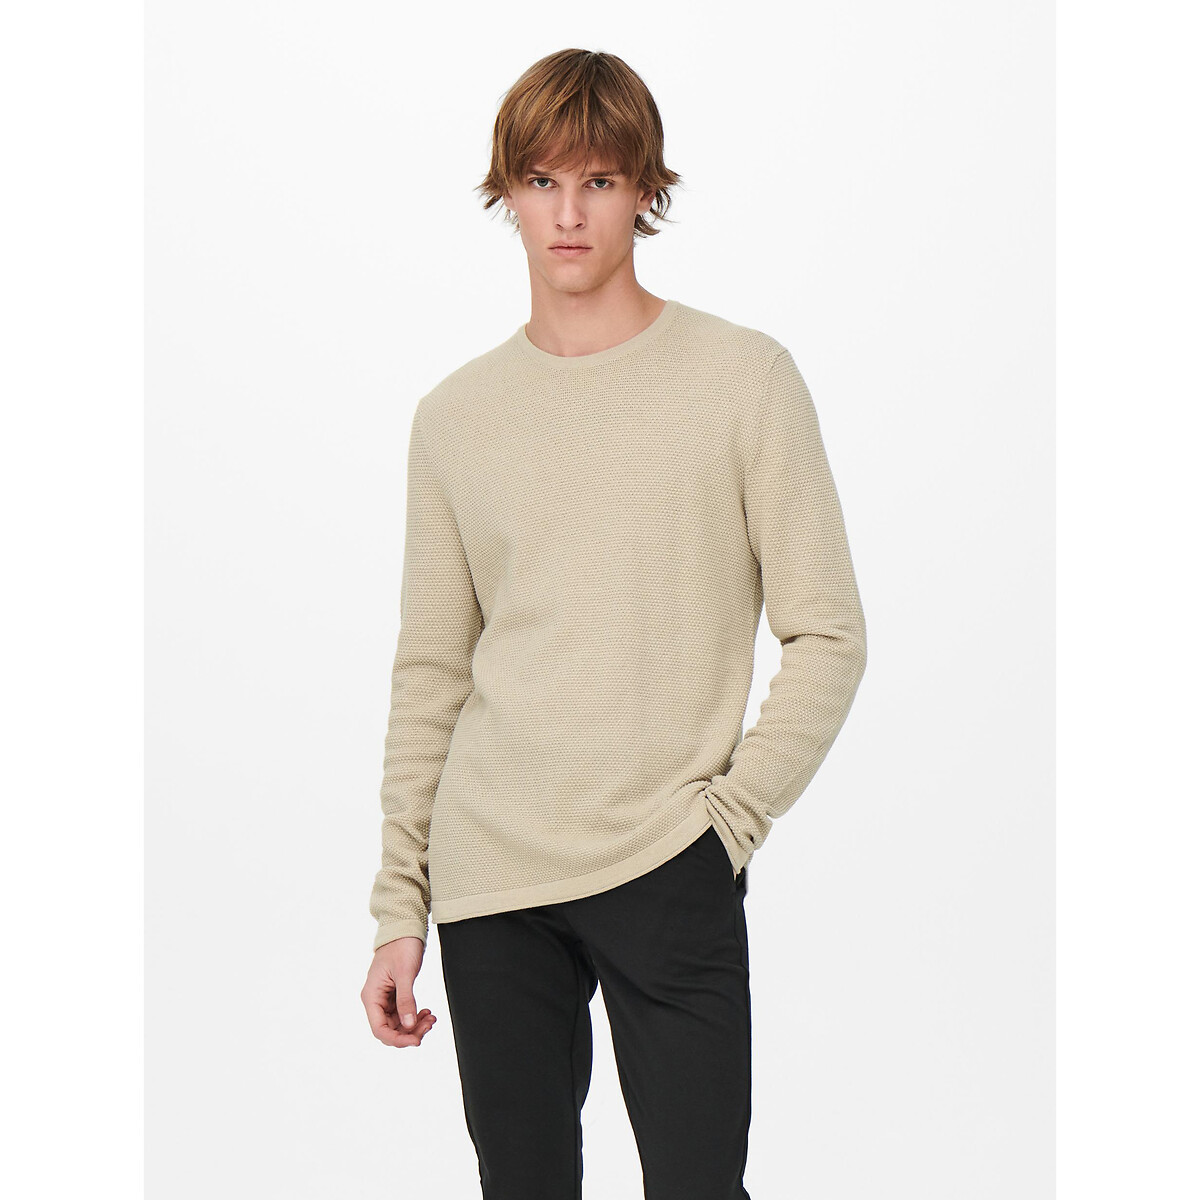 Panter Life Cotton Jumper in Structured Knit with Crew Neck